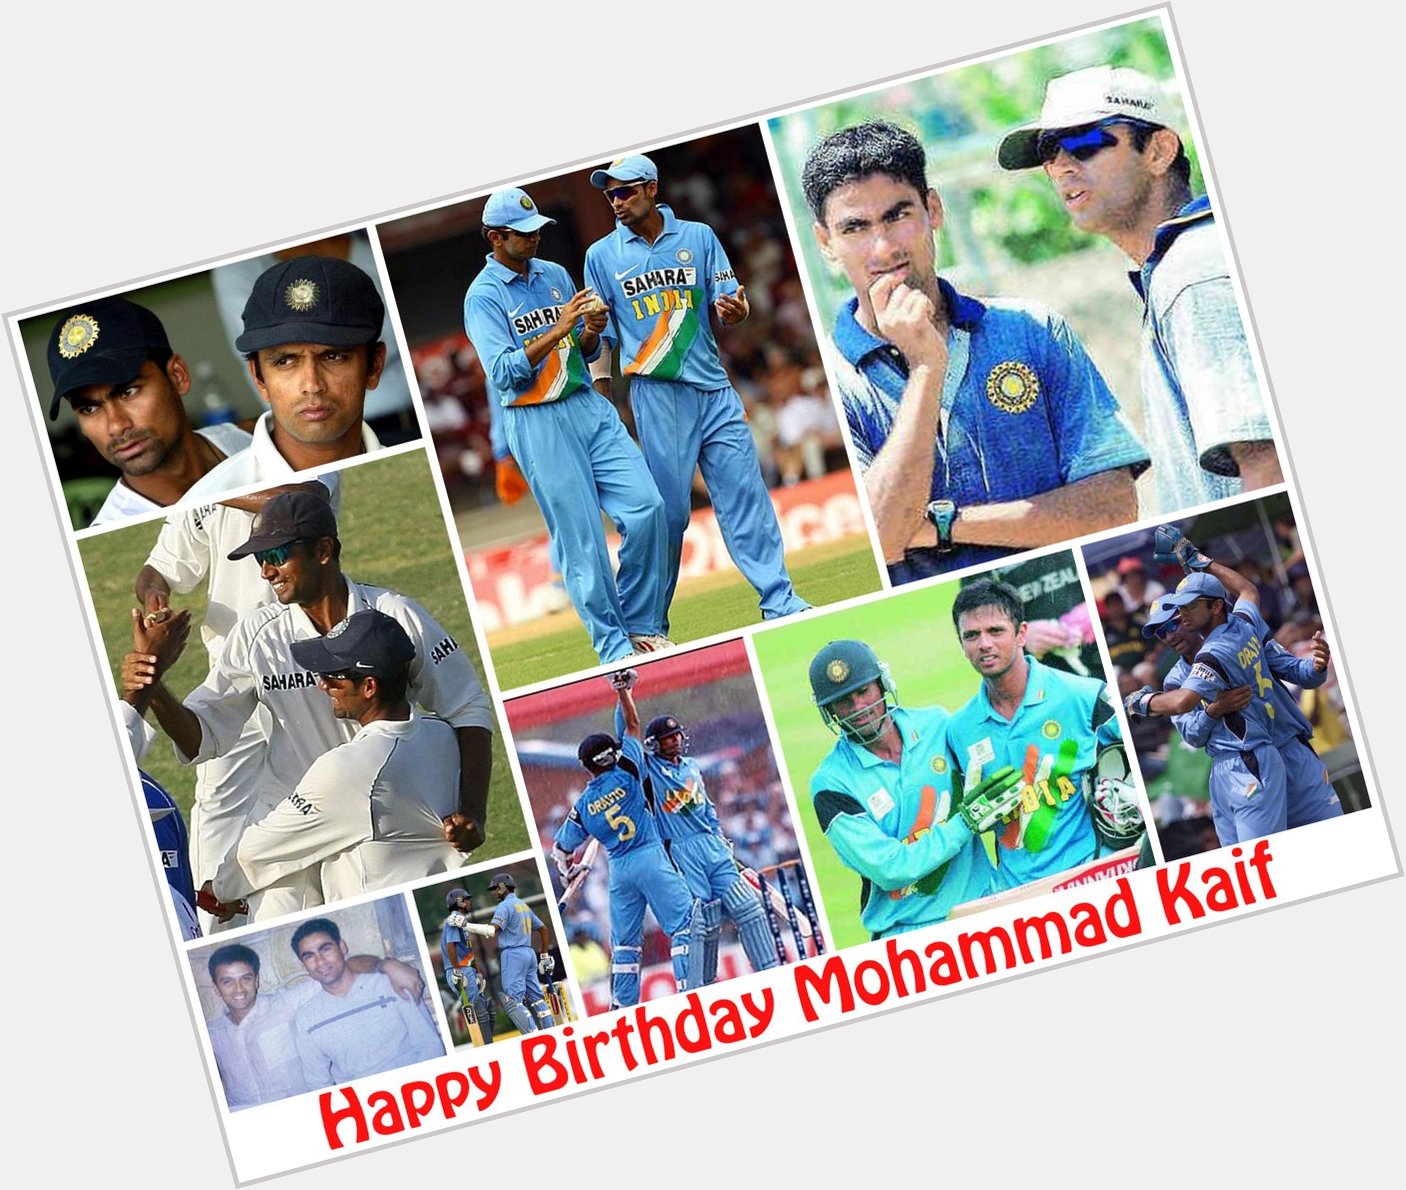 " Happy Birthday Mohammad Kaif 
Thank you for all those match winning partnerships Happy bday 